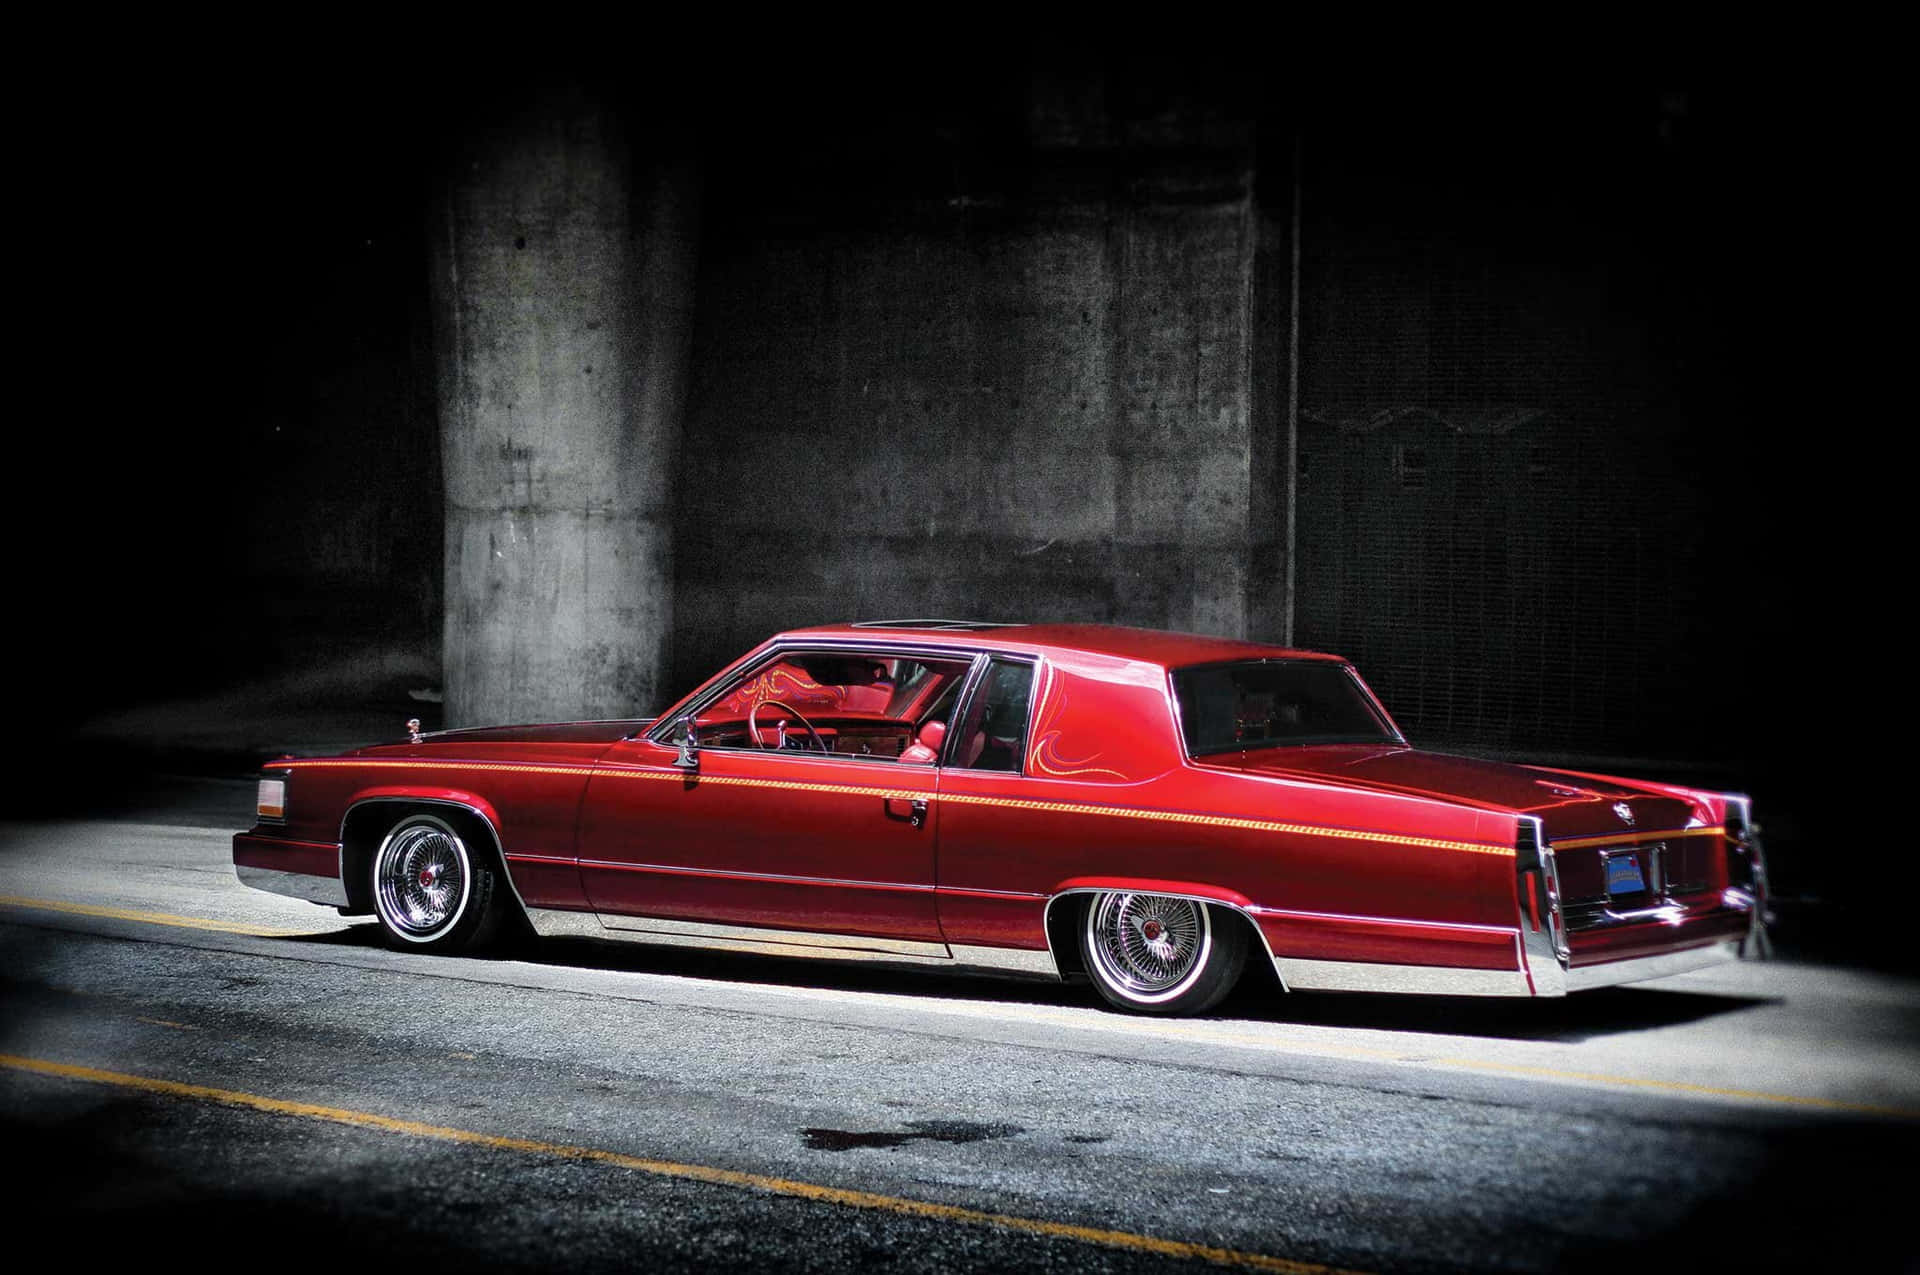 Classic Cadillac Deville on the Street Wallpaper